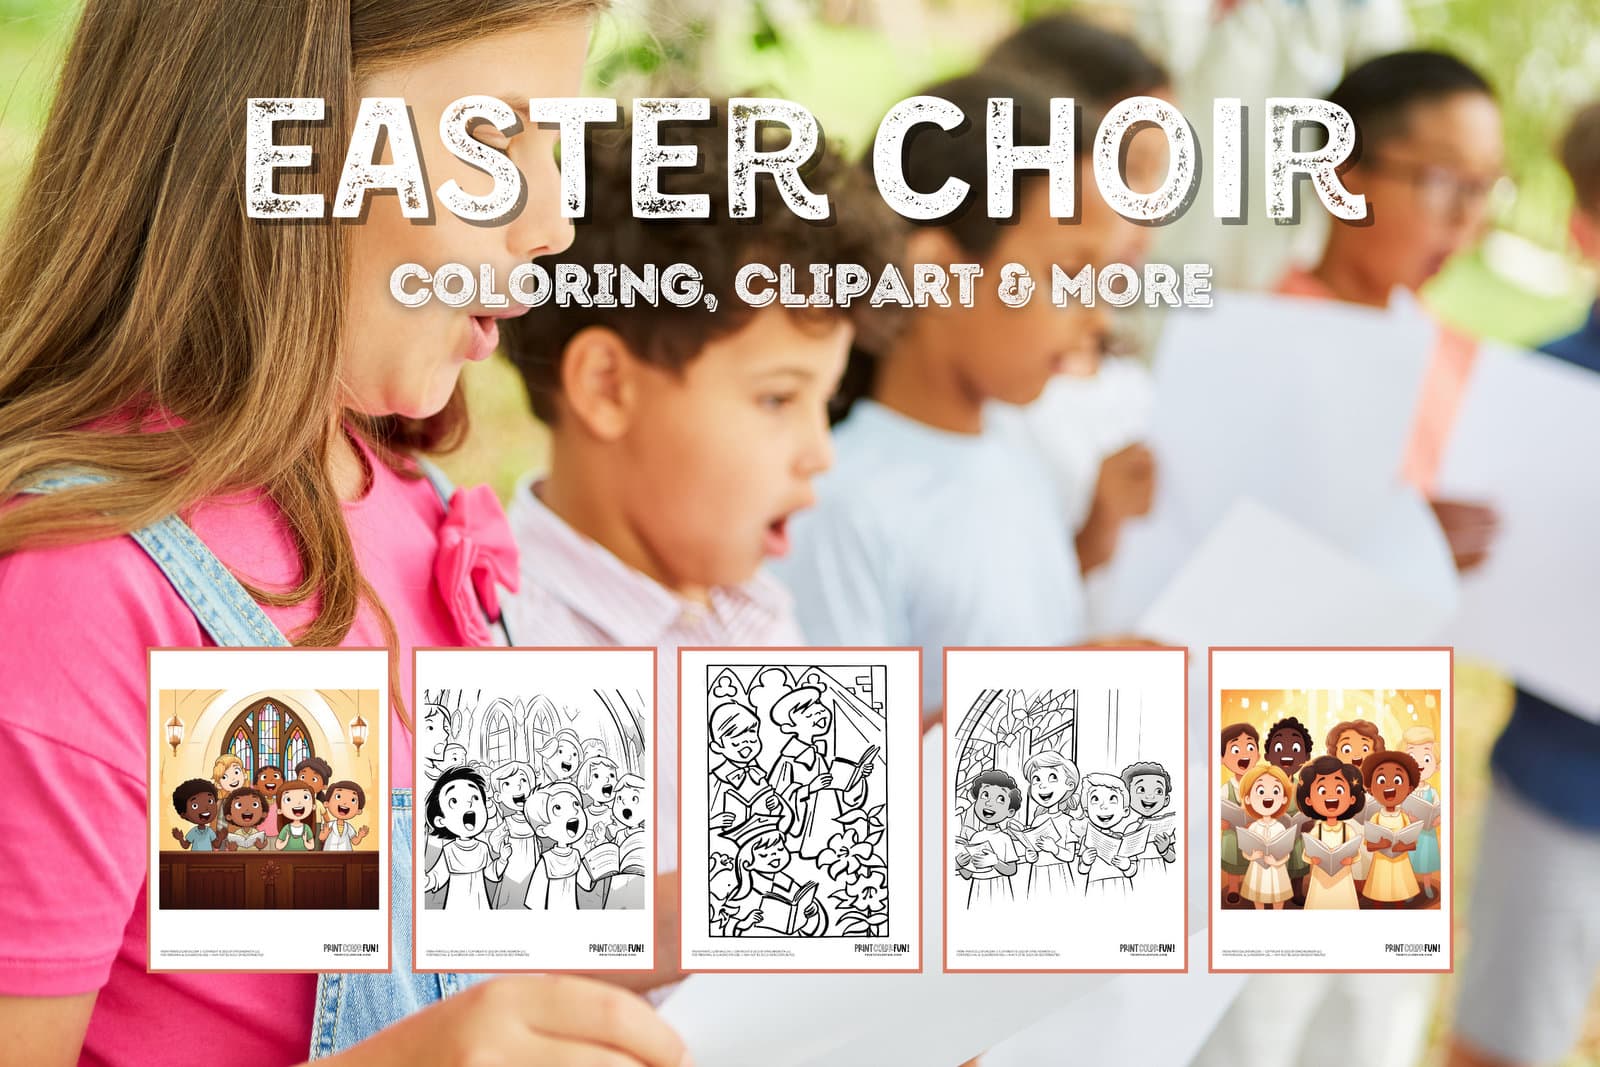 Easter choir clipart and coloring pages from PrintColorFun com